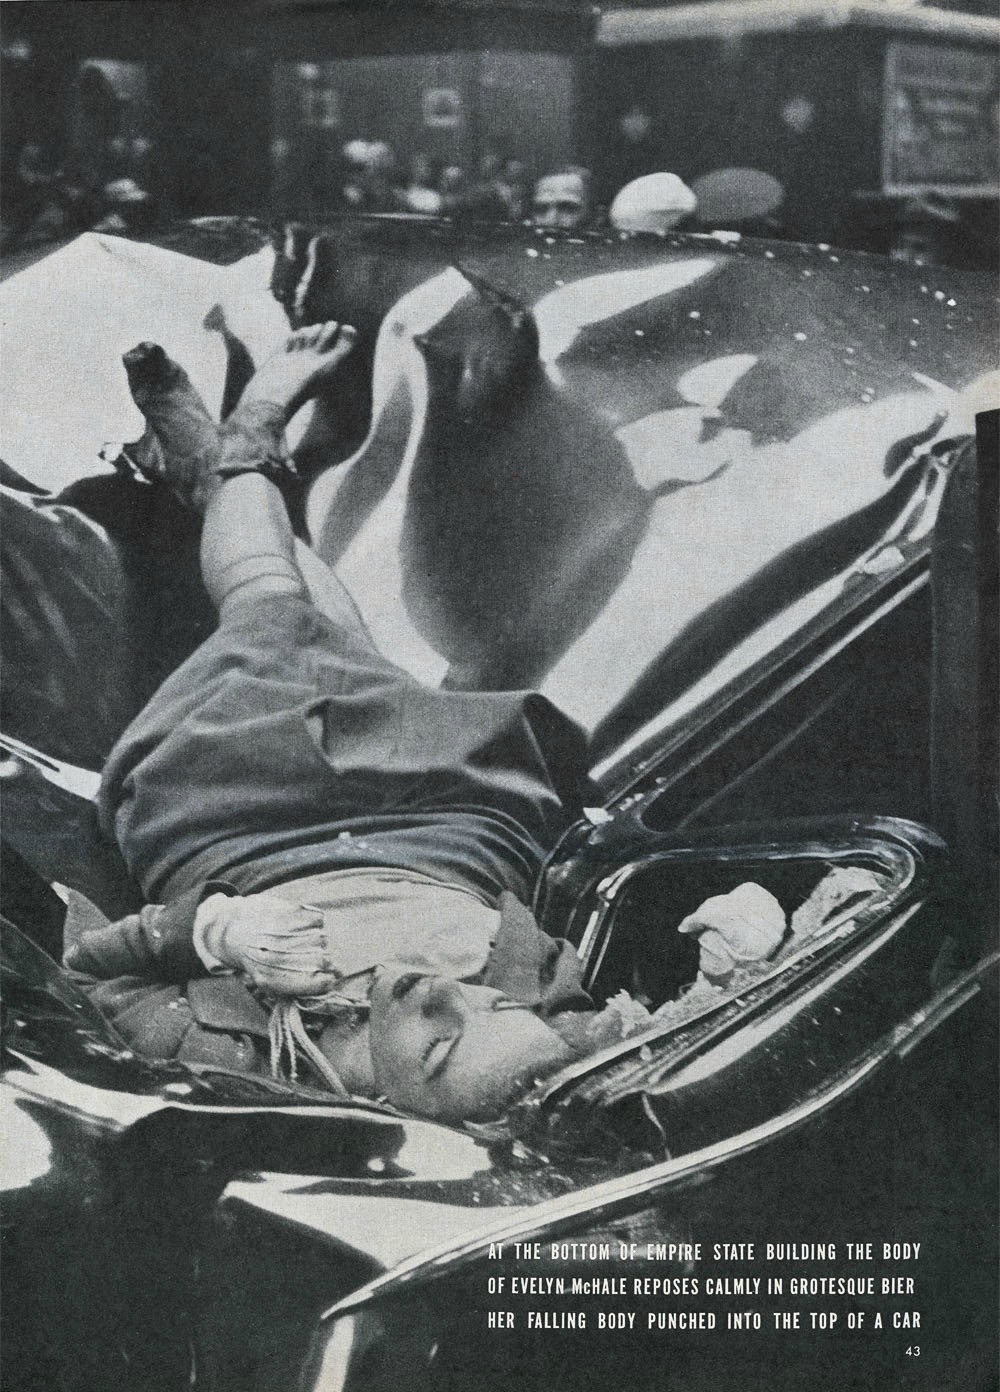 The most beautiful suicide - On May 1, 1947, Evelyn McHale leapt to her death from the observation deck of the Empire State Building. Photographer Robert Wiles took a photo of McHale a few minutes after her death.